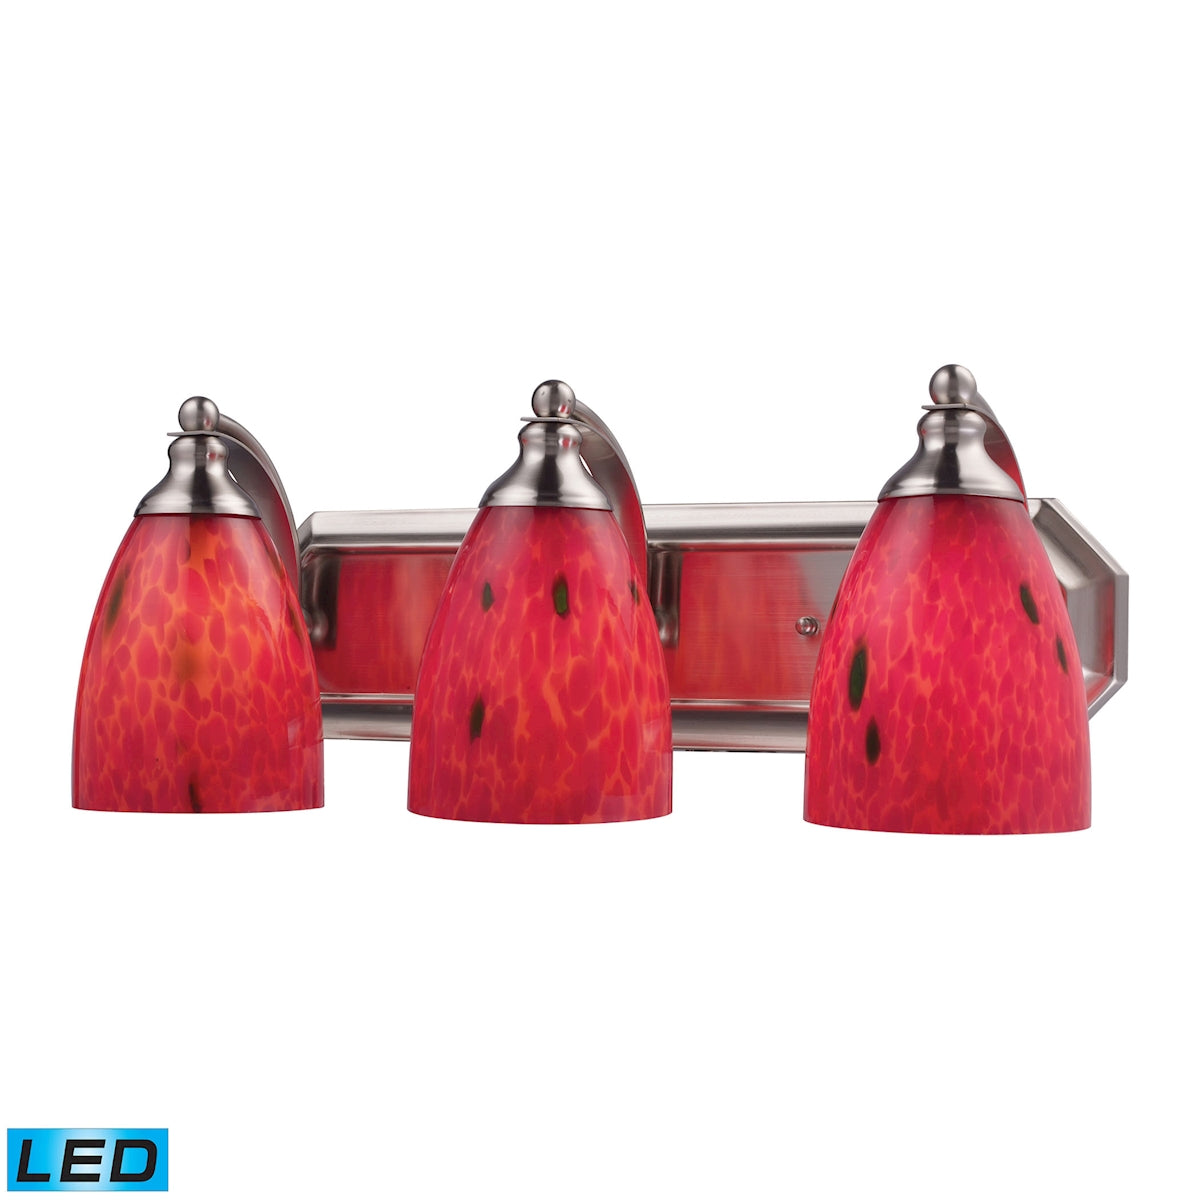 ELK Lighting 570-3N-FR-LED Mix-N-Match Vanity 3-Light Wall Lamp in Satin Nickel with Fire Red Glass - Includes LED Bulbs